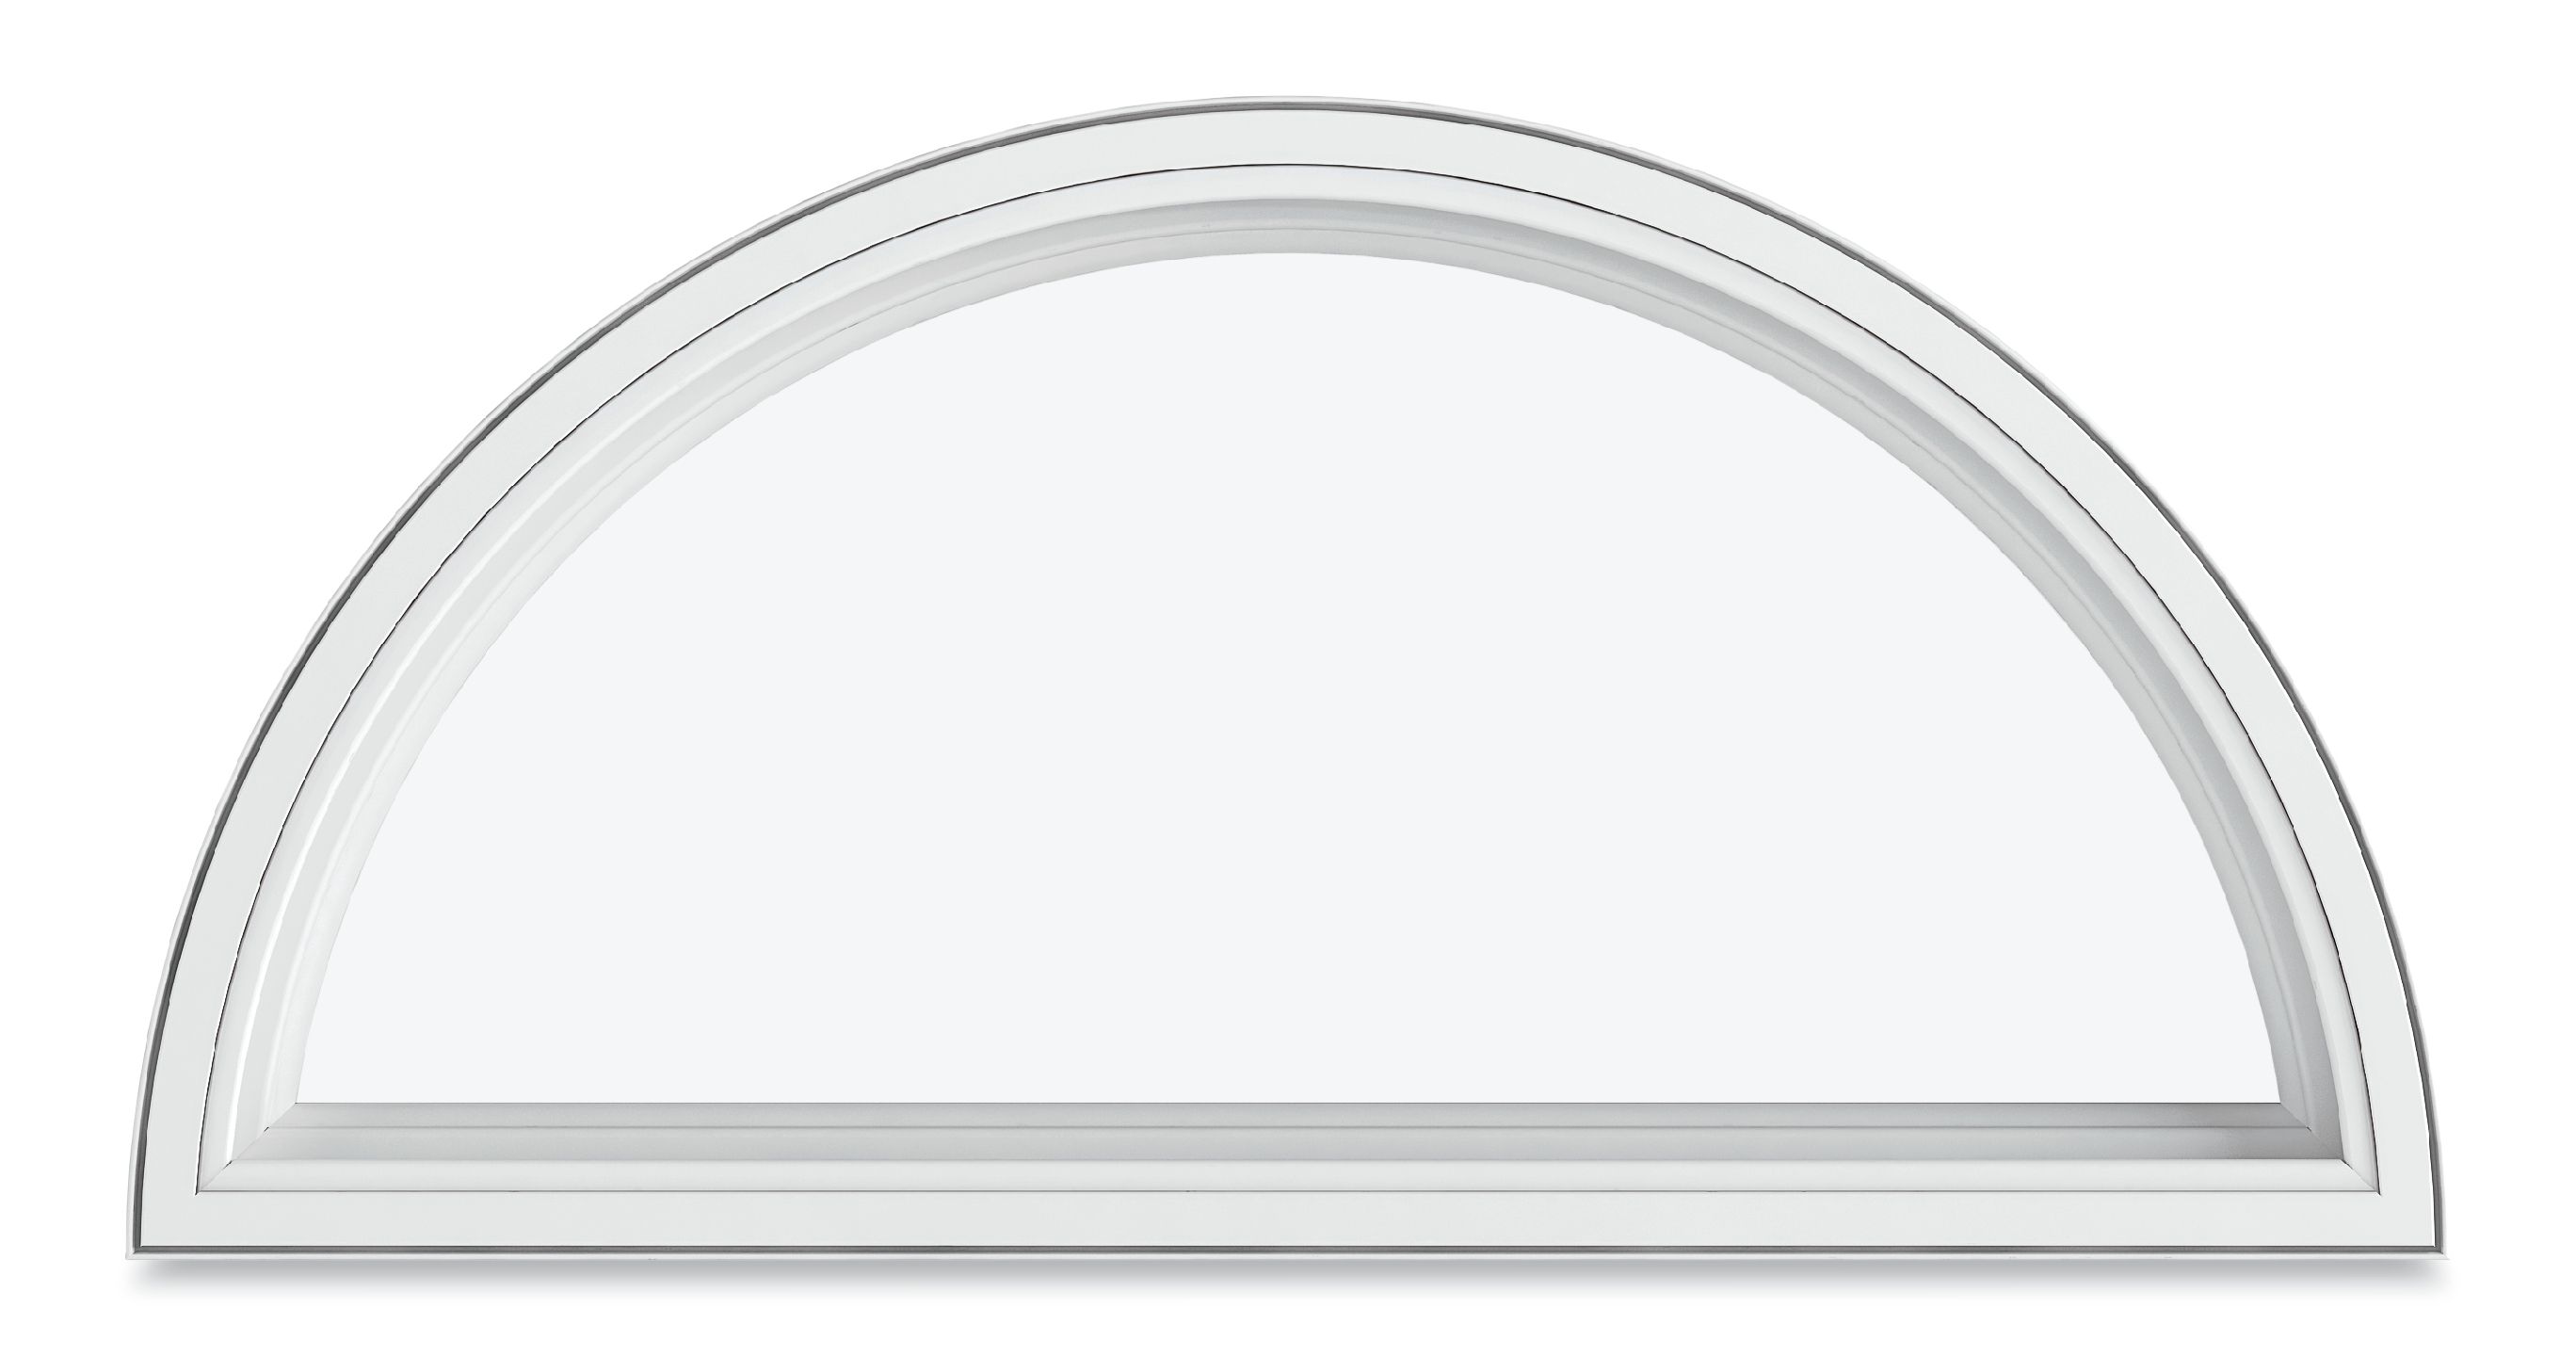  Common names for round top windows can include springline, half-moon, arch top, half round, and circle top windows